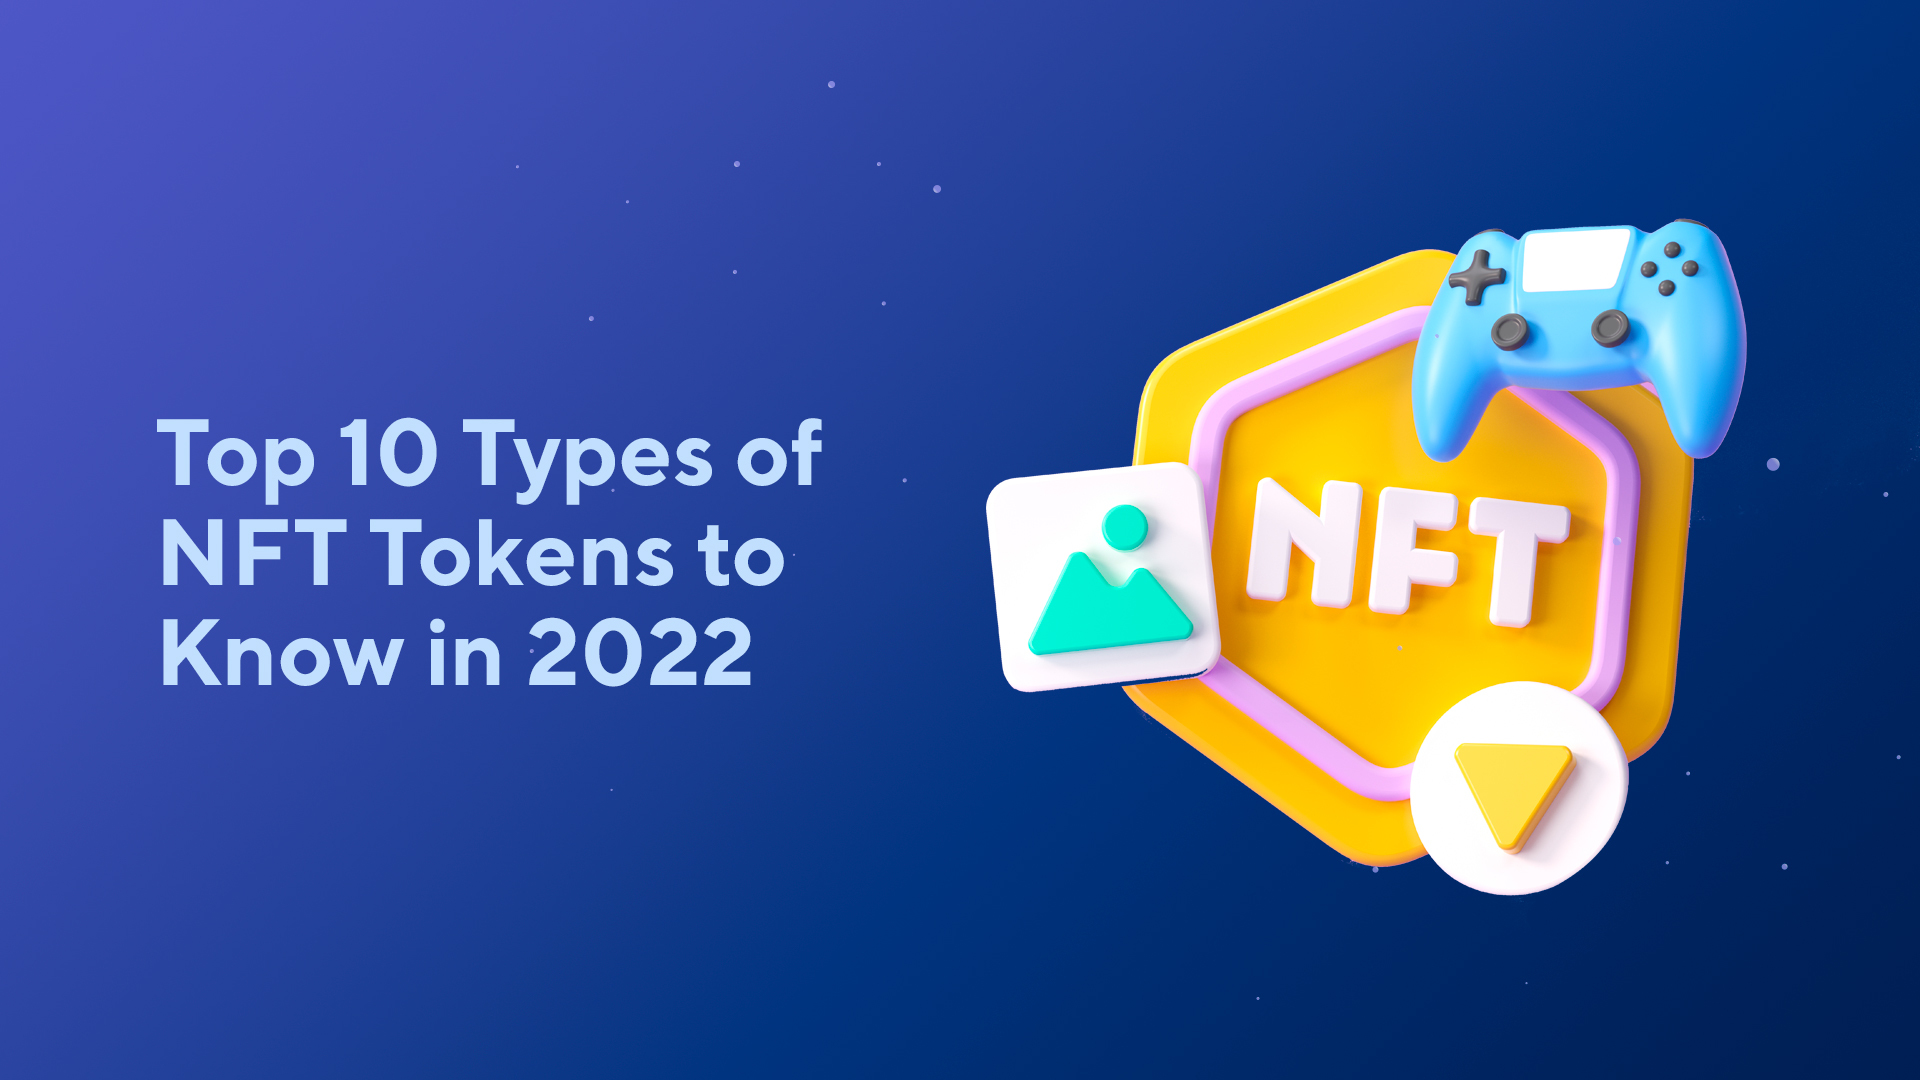 Top 10 Types of NFT Tokens to Know in 2022